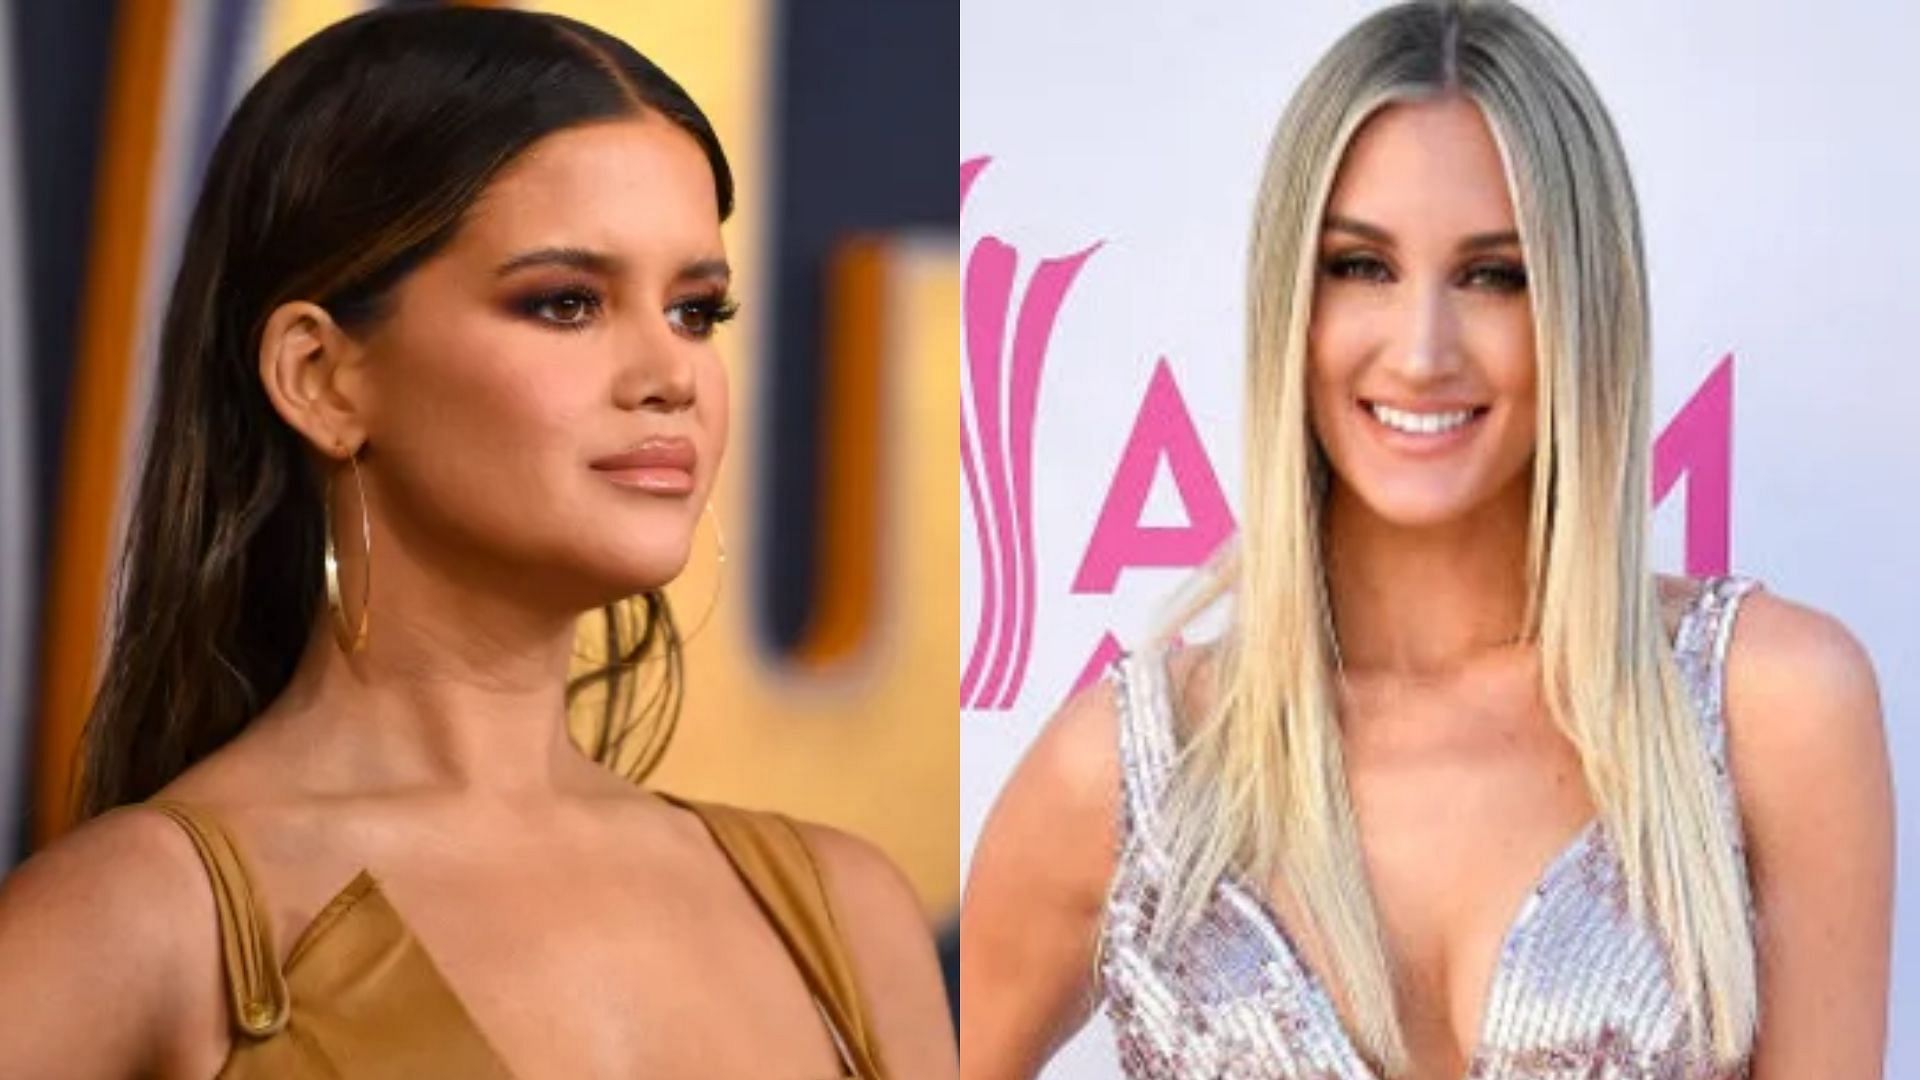 (left) Maren Morris and (right) Brittany Aldean drama explained. (Images via Denise Truscello/Getty Images and Frazer Harrison/Getty Images)